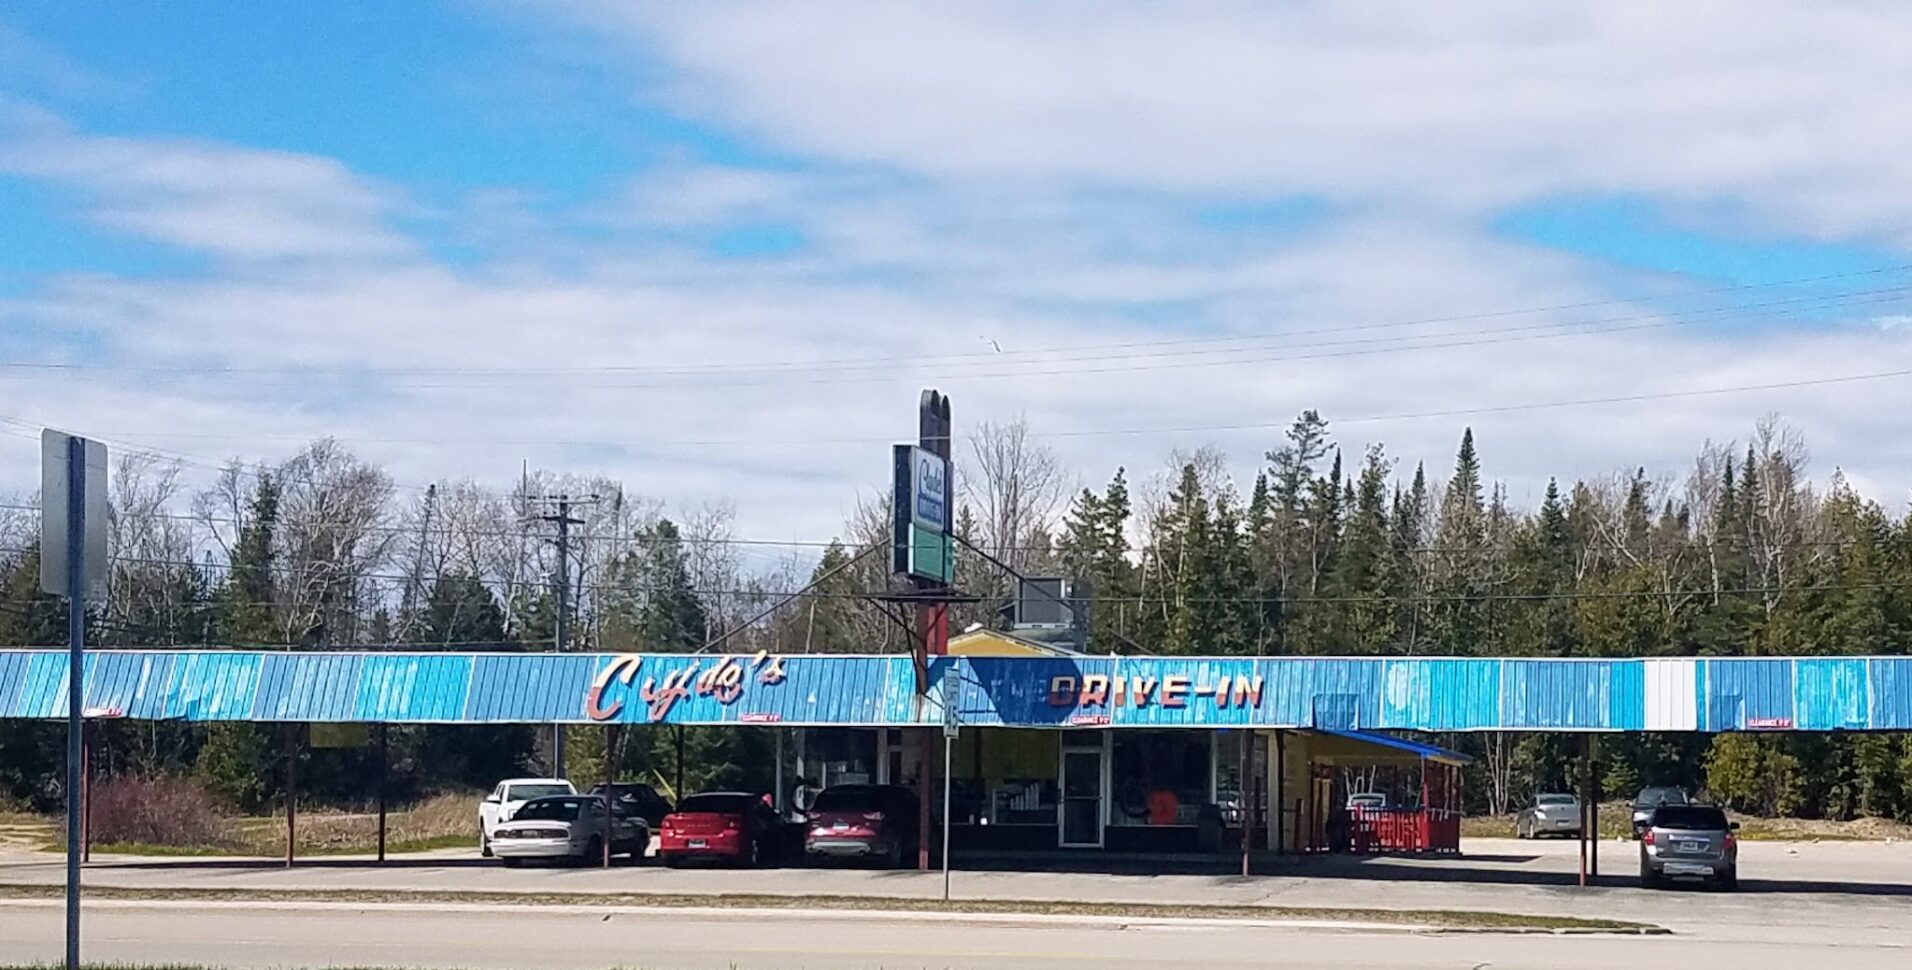 Clyde's Drive-In